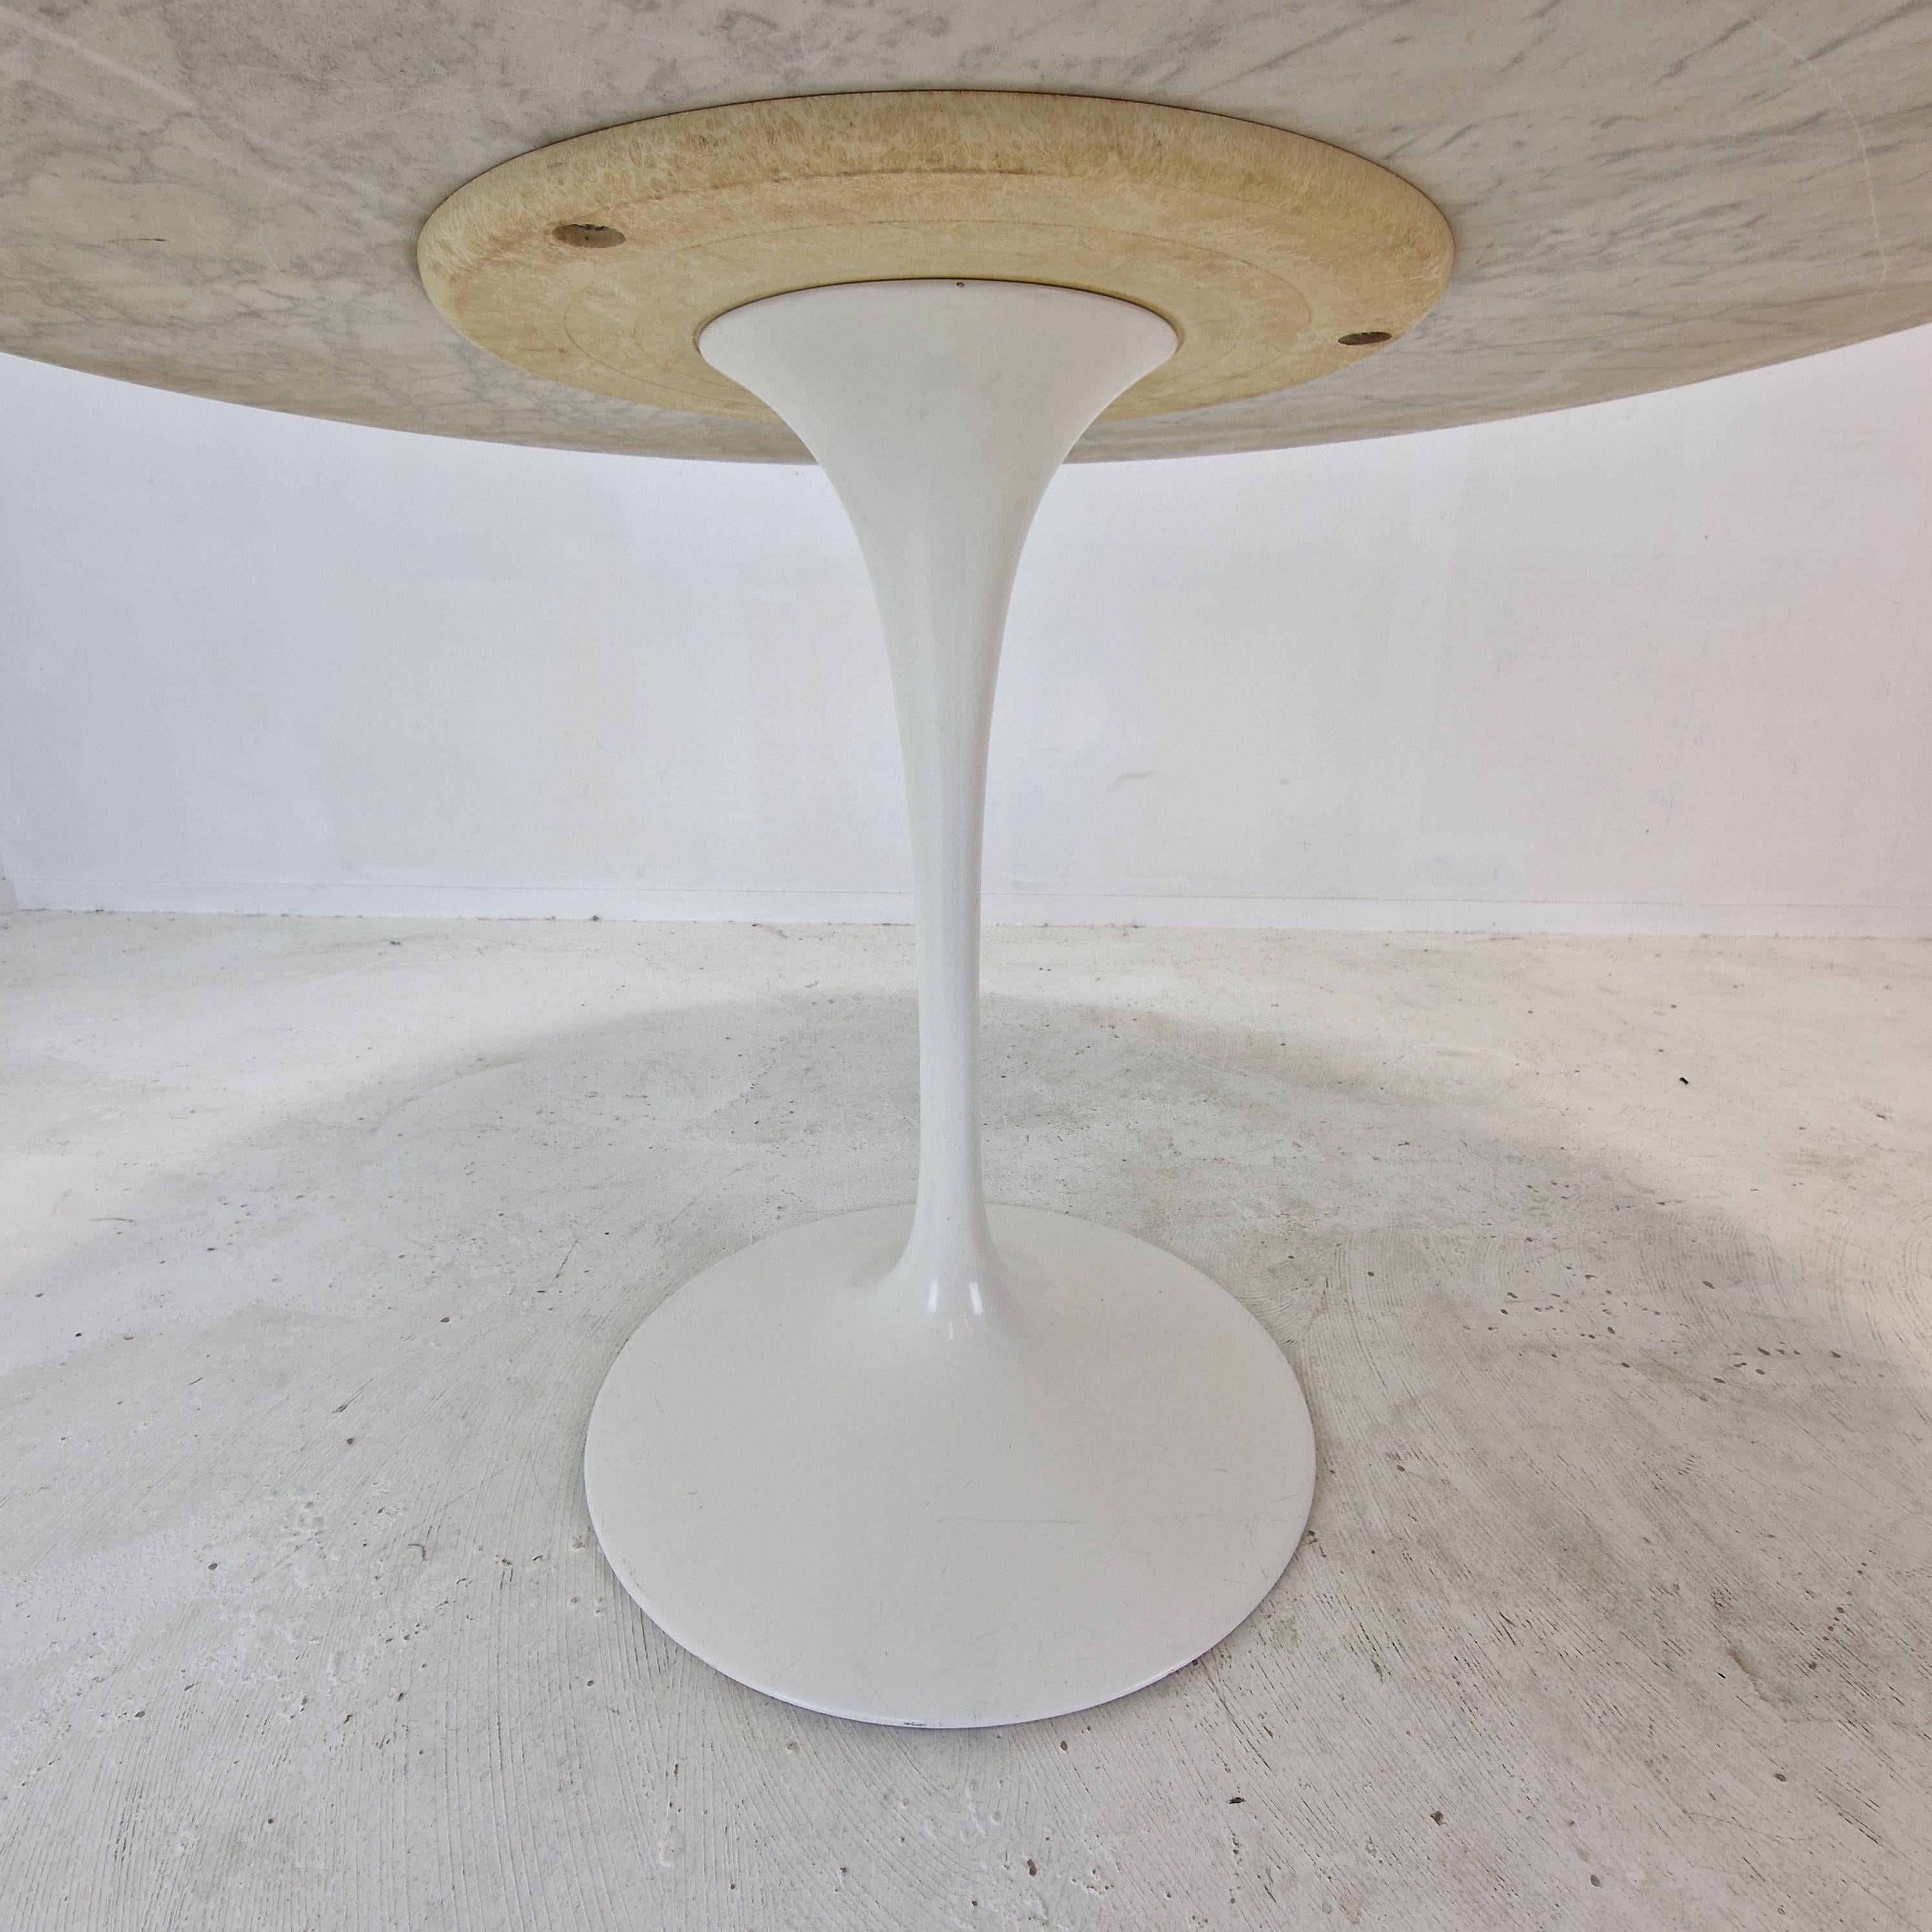 Mid-20th Century Knoll Marble Dining Table With 5 Chairs by Eero Saarinen, 1960s For Sale